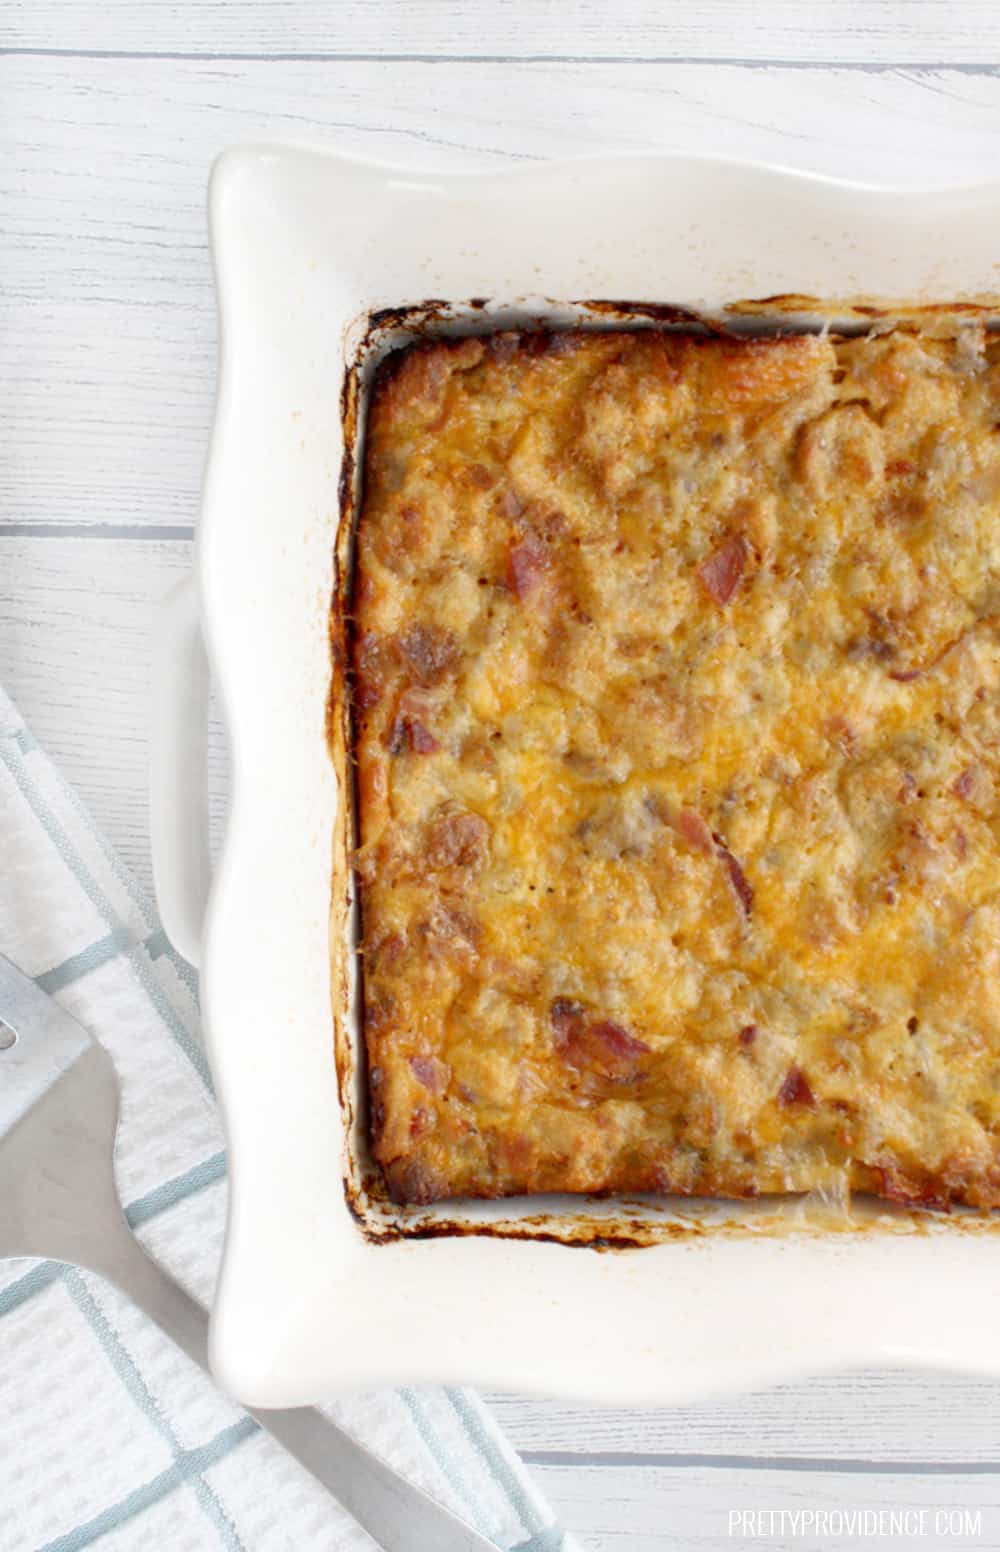 Prepare the night before, pop into the oven in the morning and enjoy breakfast heaven! This overnight breakfast casserole can't be beat! 